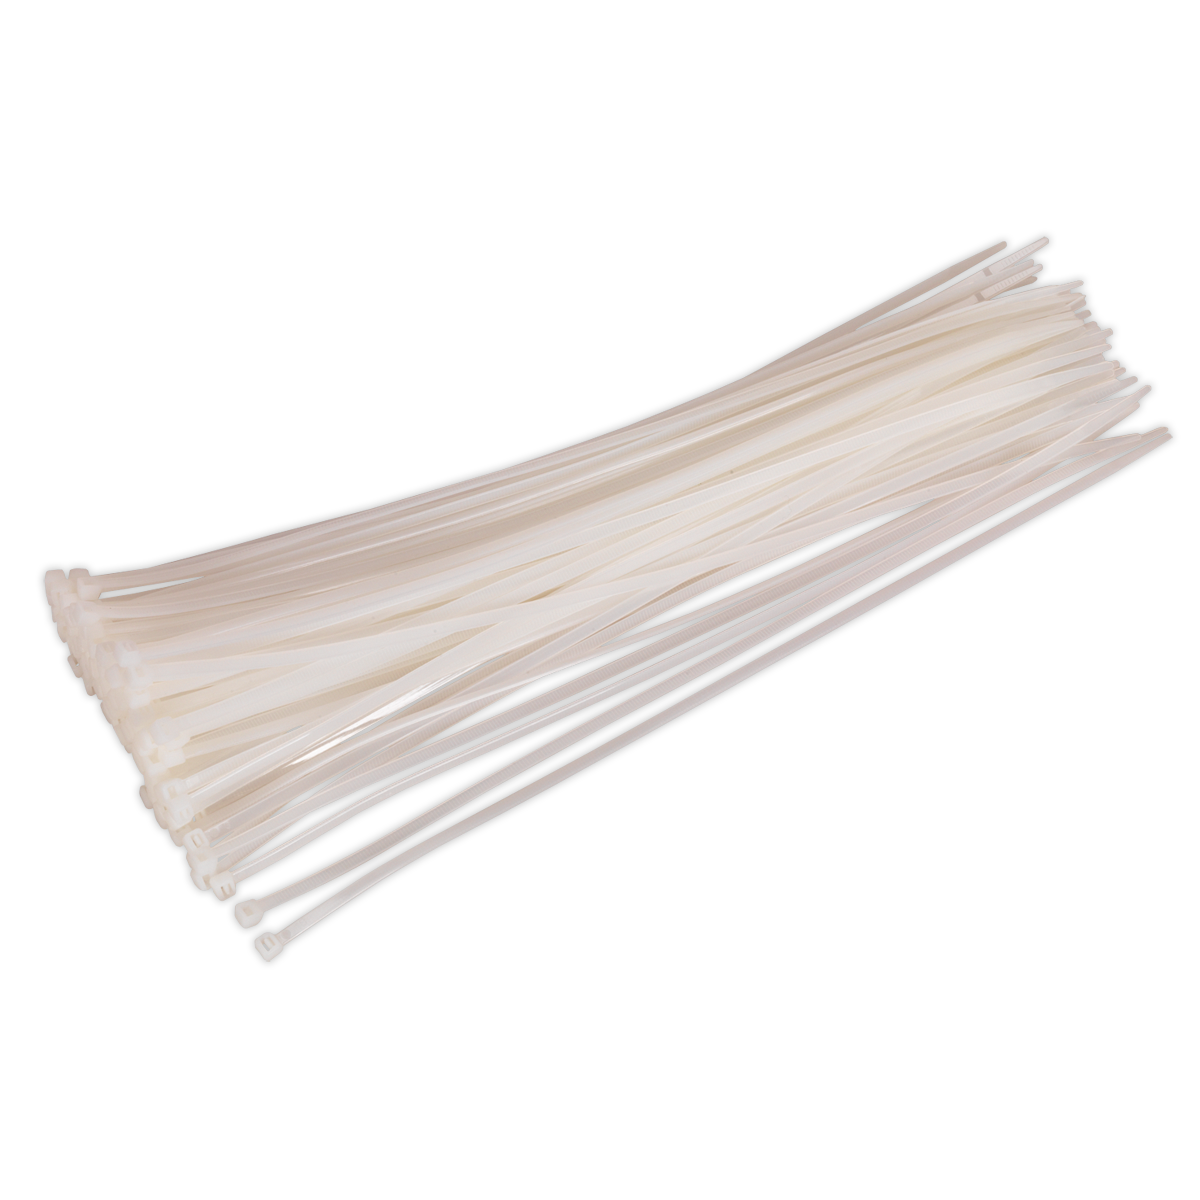 Cable Tie 380 x 4.8mm White Pack of 100 - CT38048P100W - Farming Parts